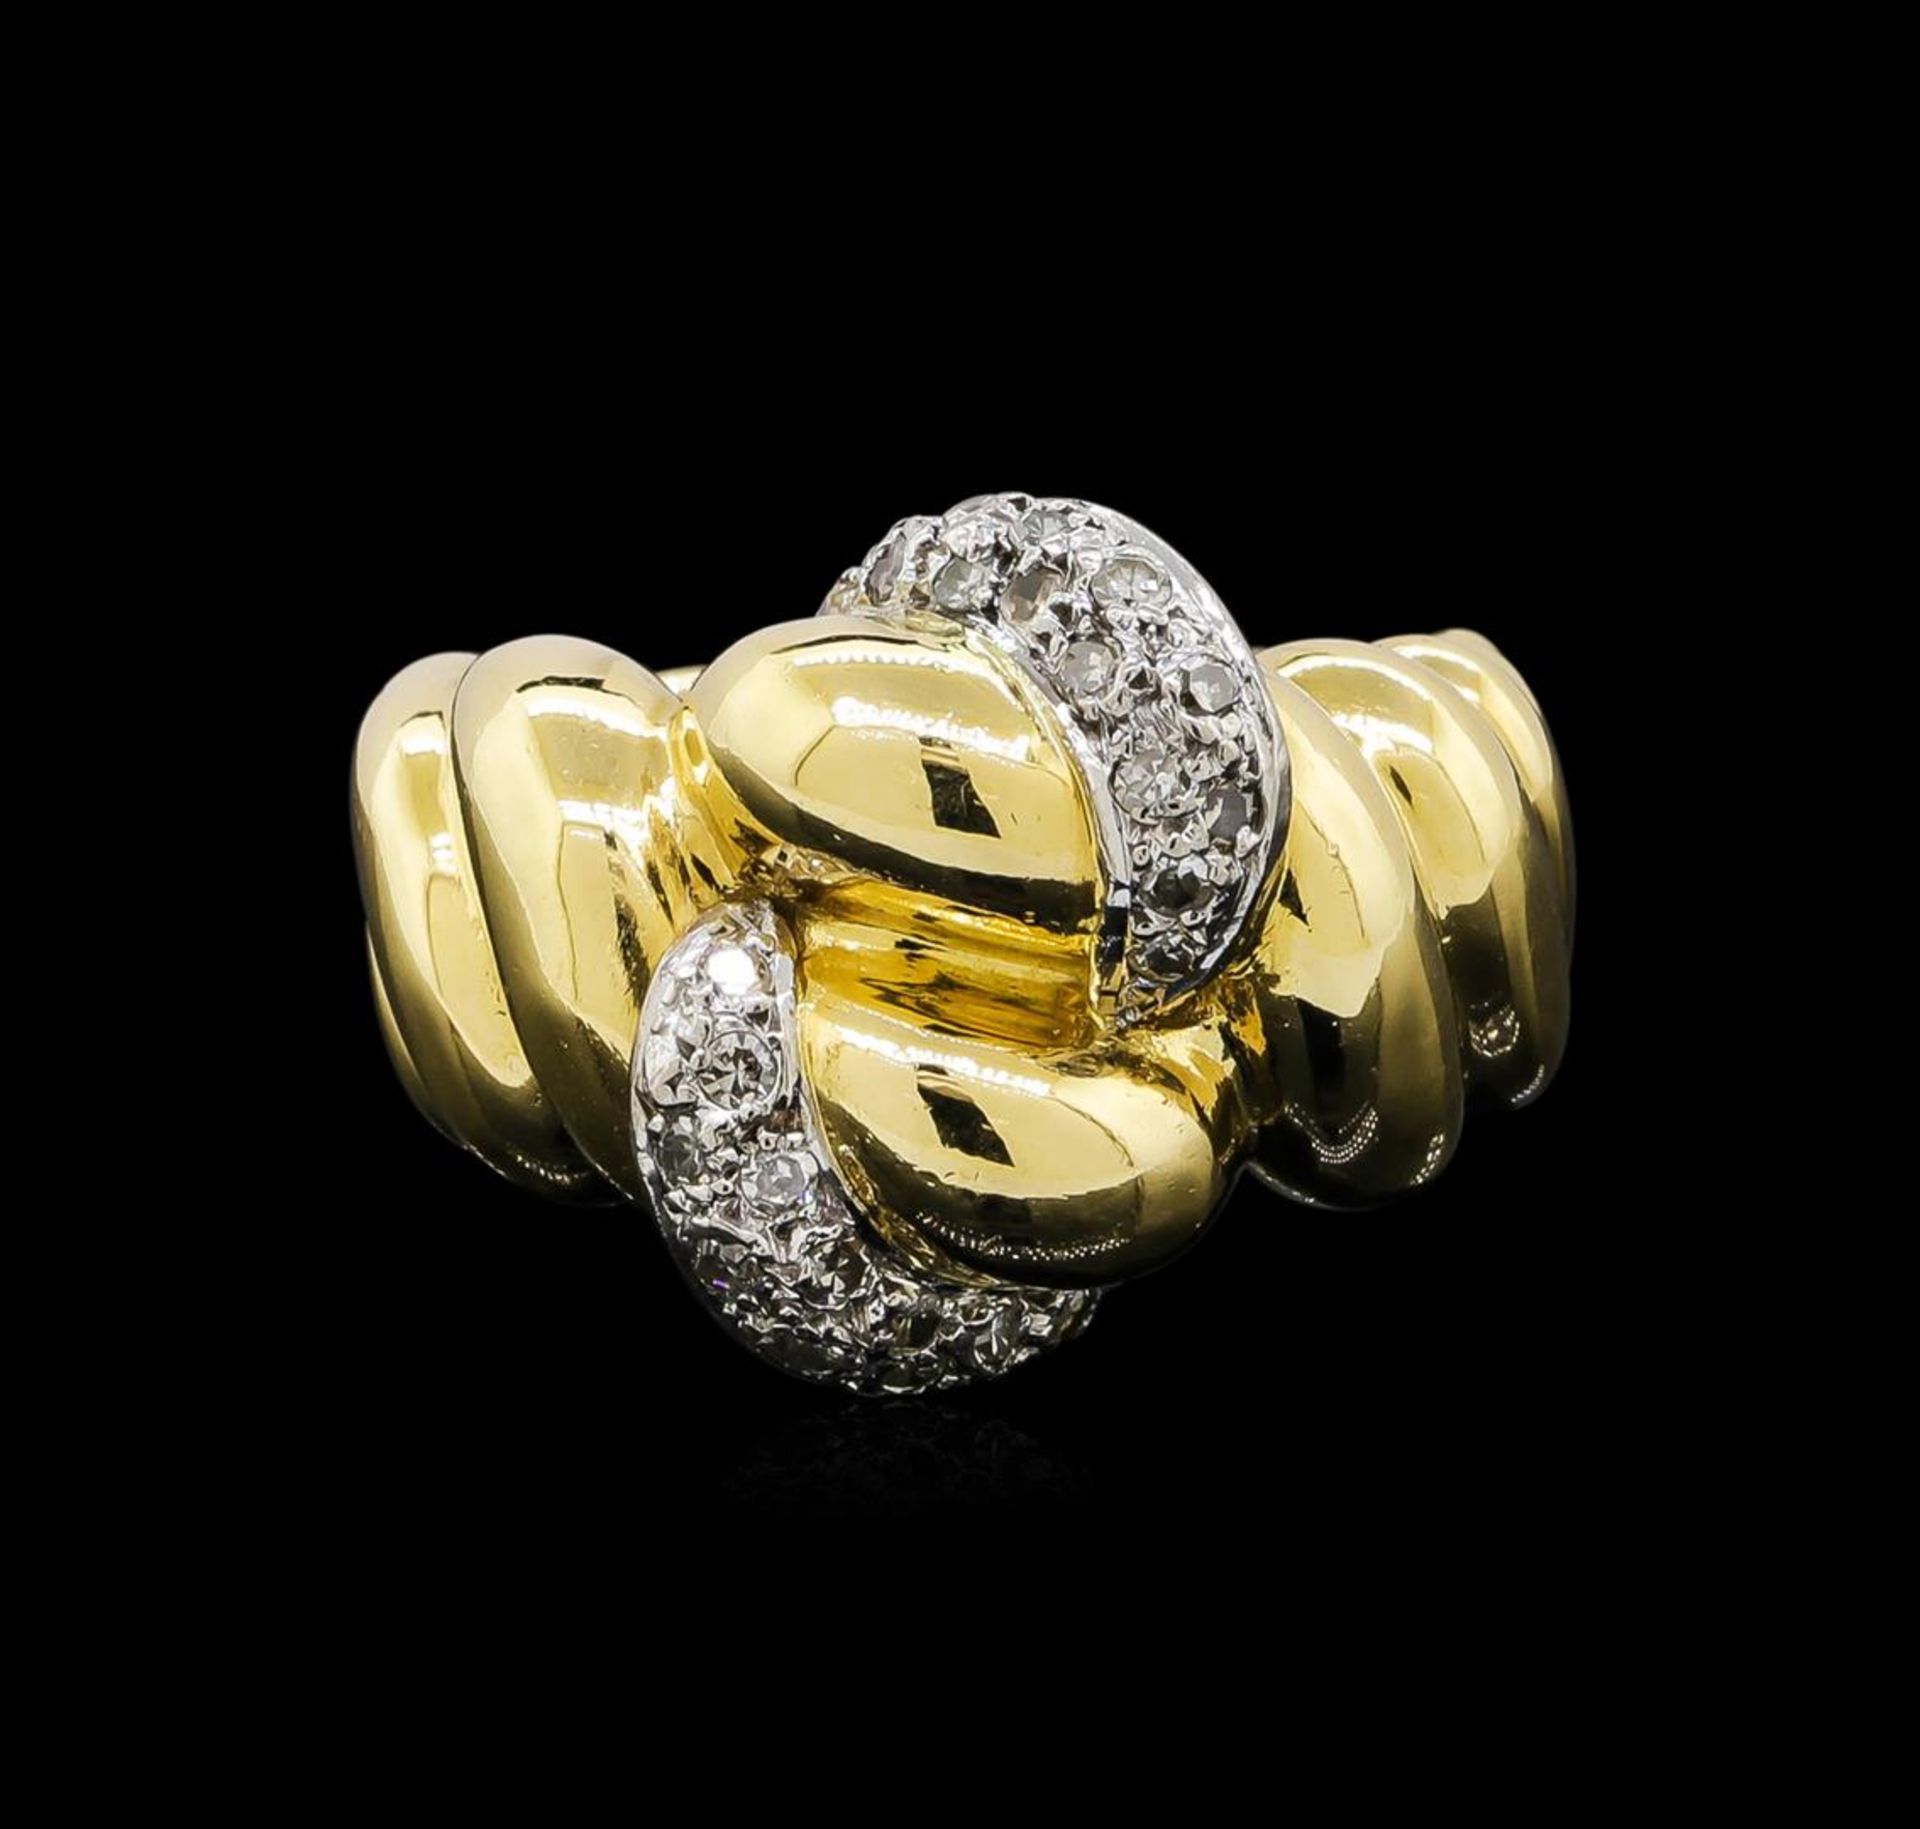 18KT Two-Tone Gold 0.43 ctw Diamond Ring - Image 2 of 5